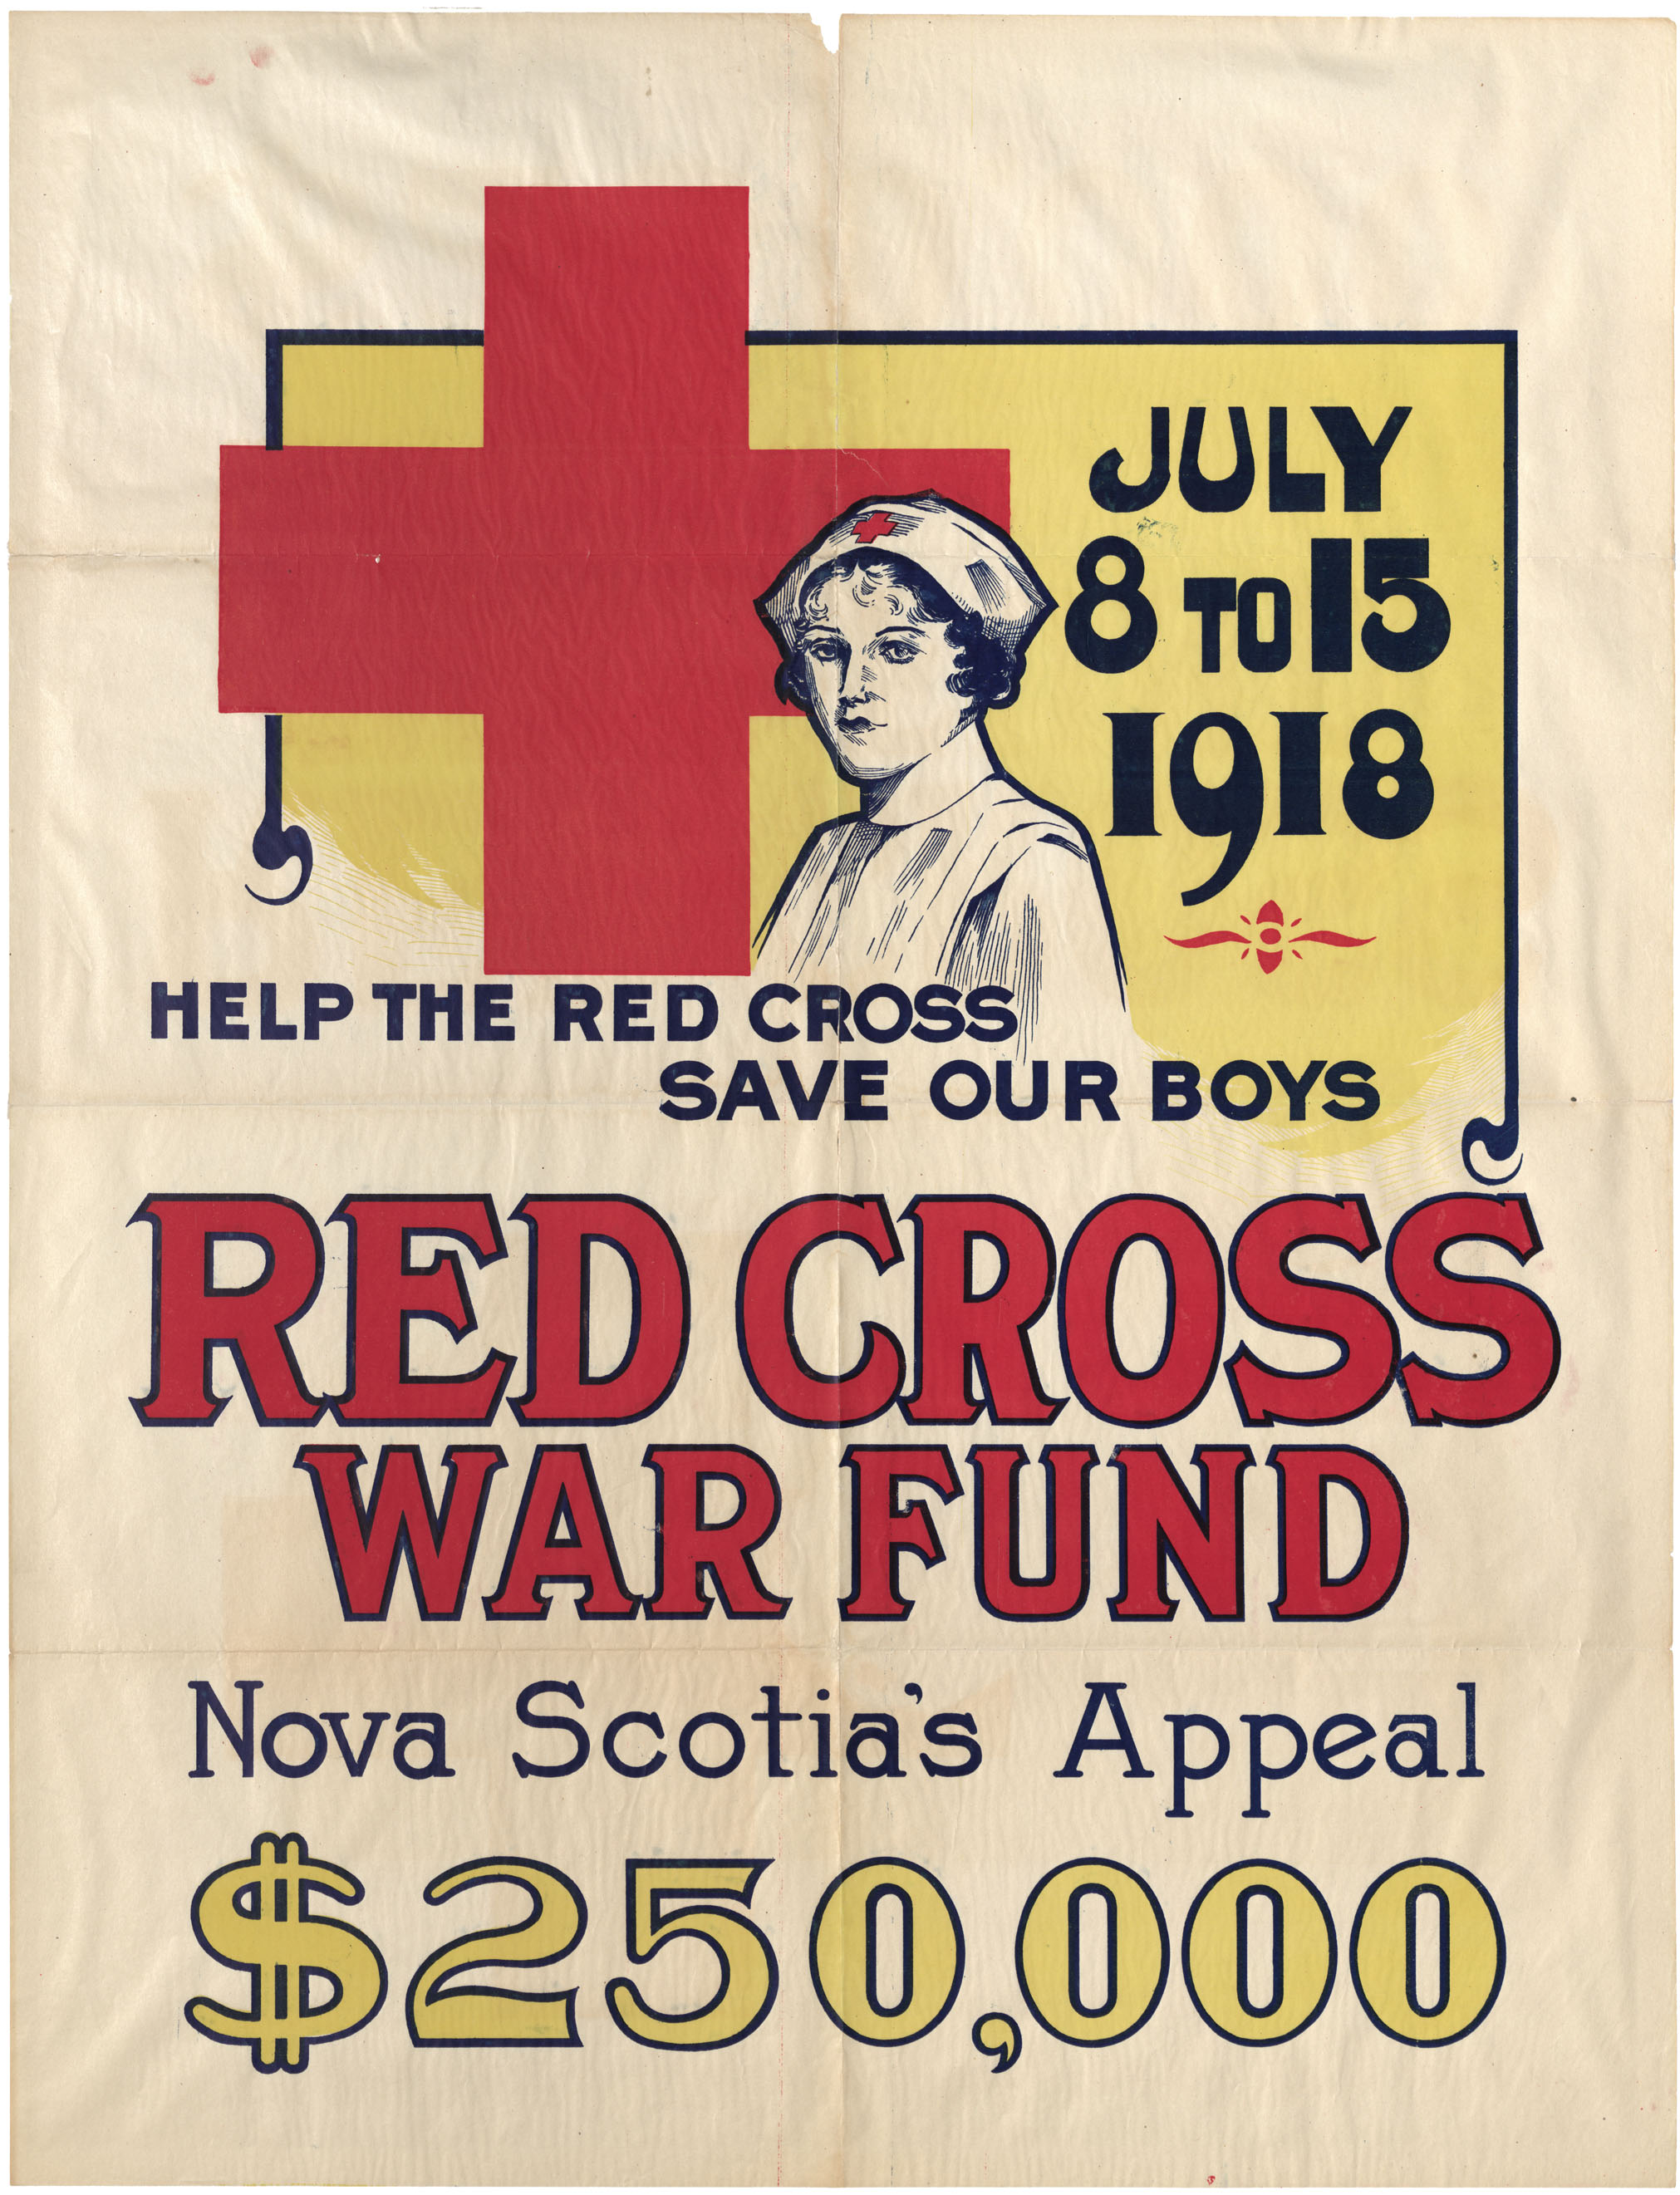 July 8 to 15, 1918 - Help the Red Cross Save Our Boys - Red Cross War Fund - Nova Scotia's Appeal $250,000